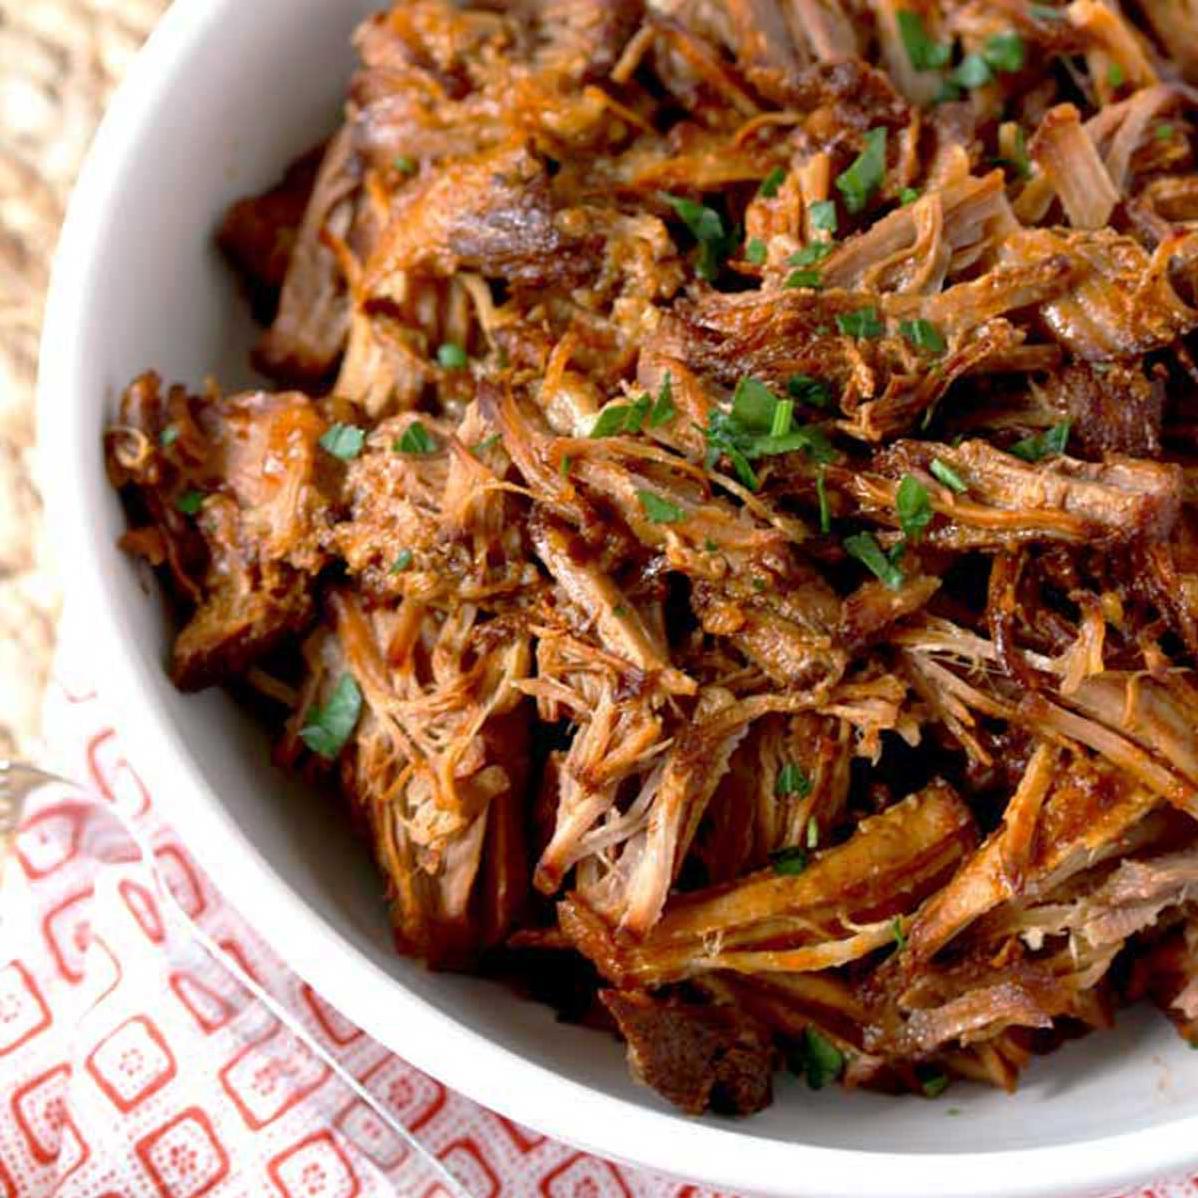  Picture-perfect pulled pork sandwiches, anyone?